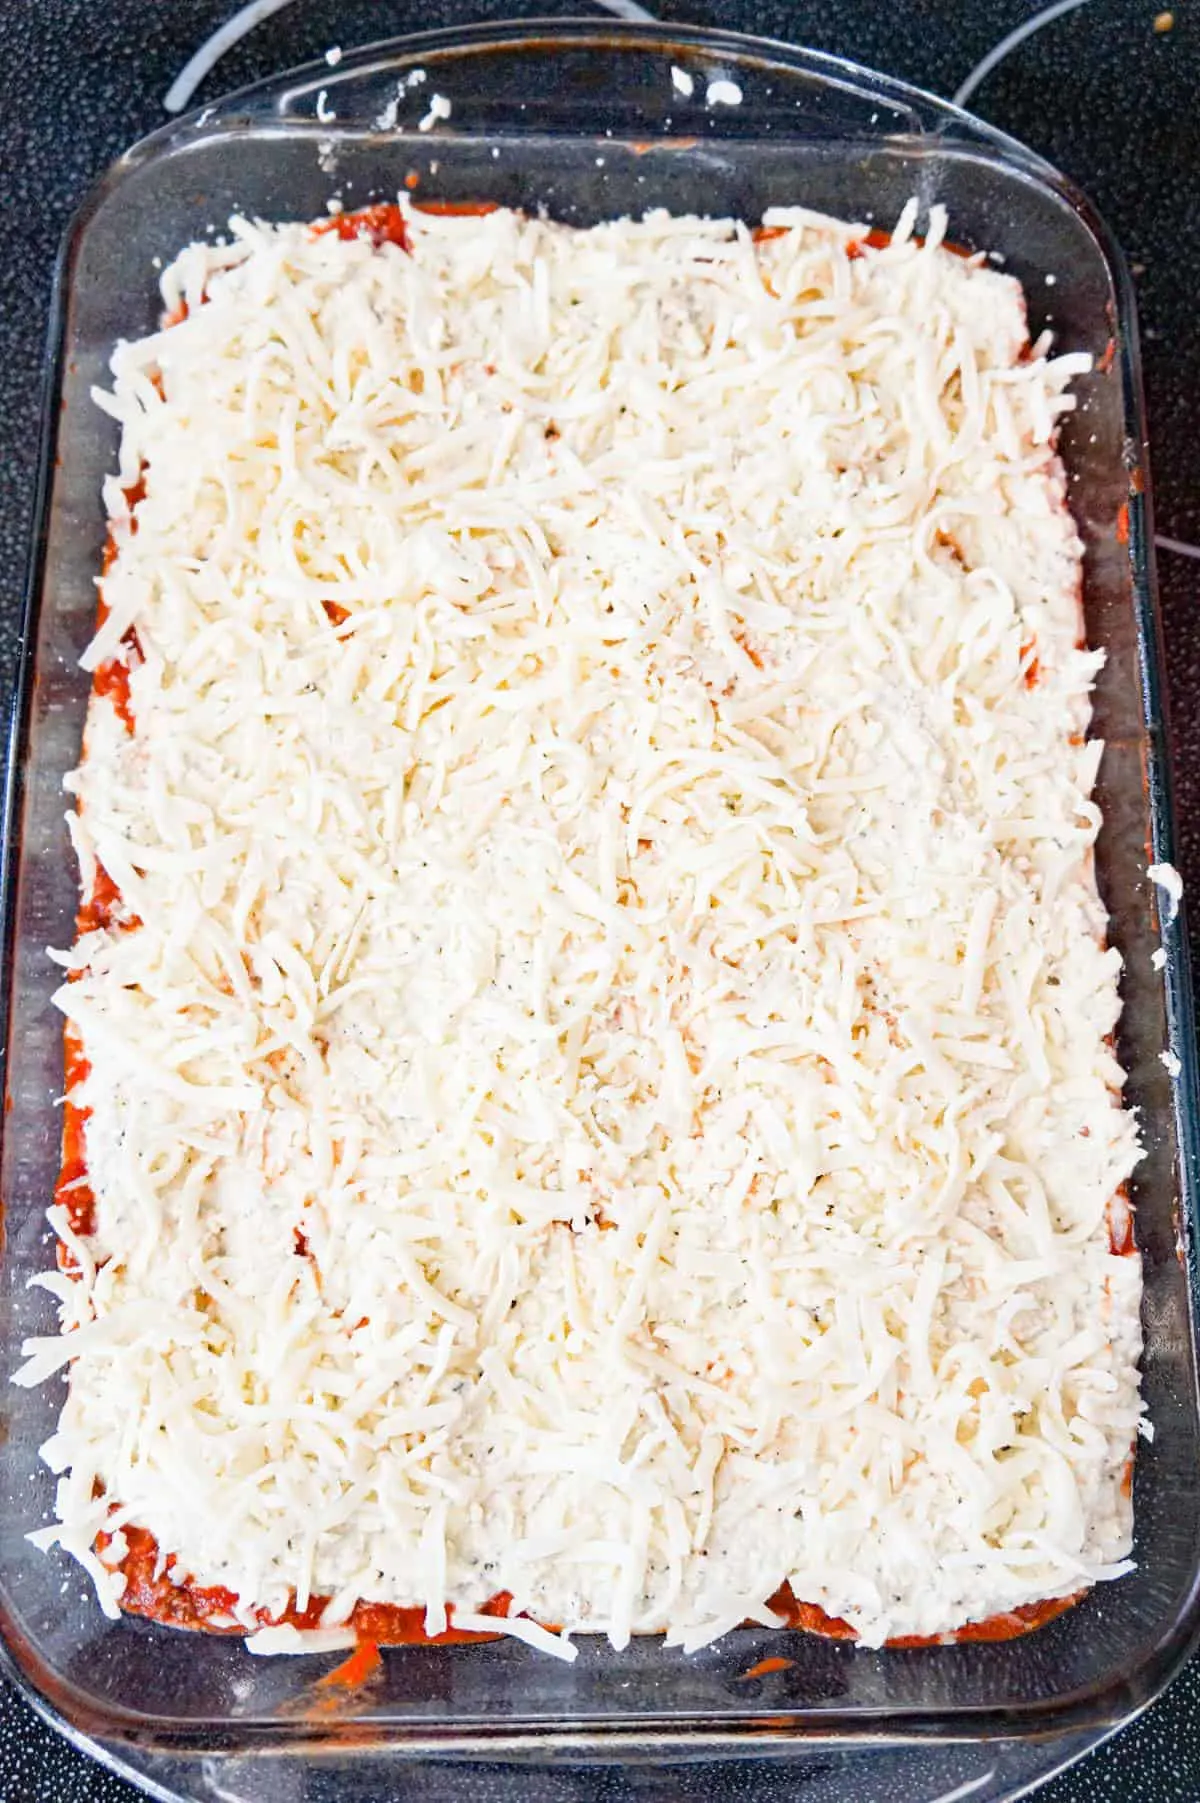 shredded mozzarella on top of ricotta mixture in a baking dish